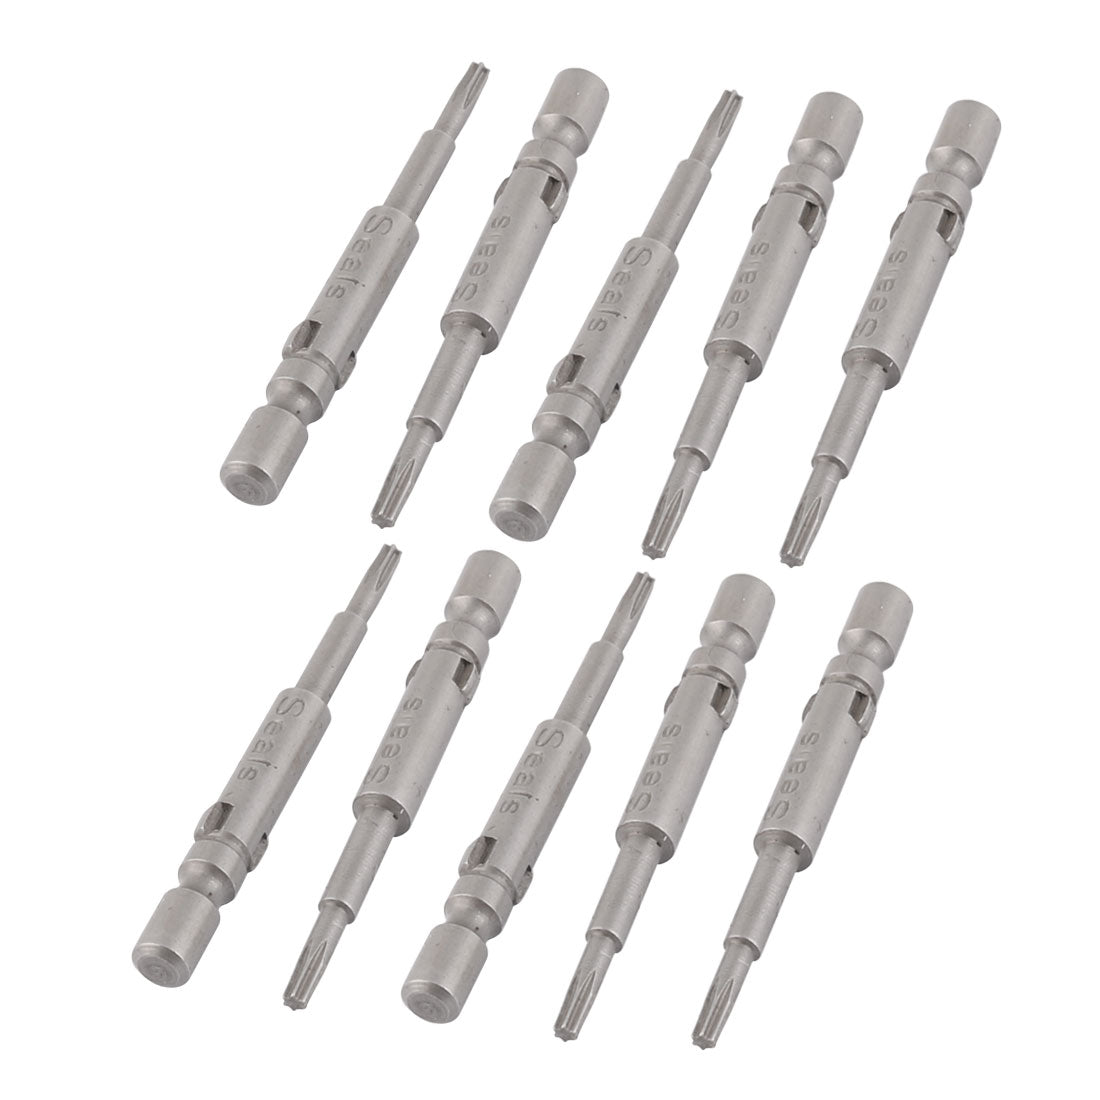 uxcell Uxcell 1.6mm Tip 4mm Round Shank T6 Magnetic Torx Screwdriver Bits Tool 10pcs